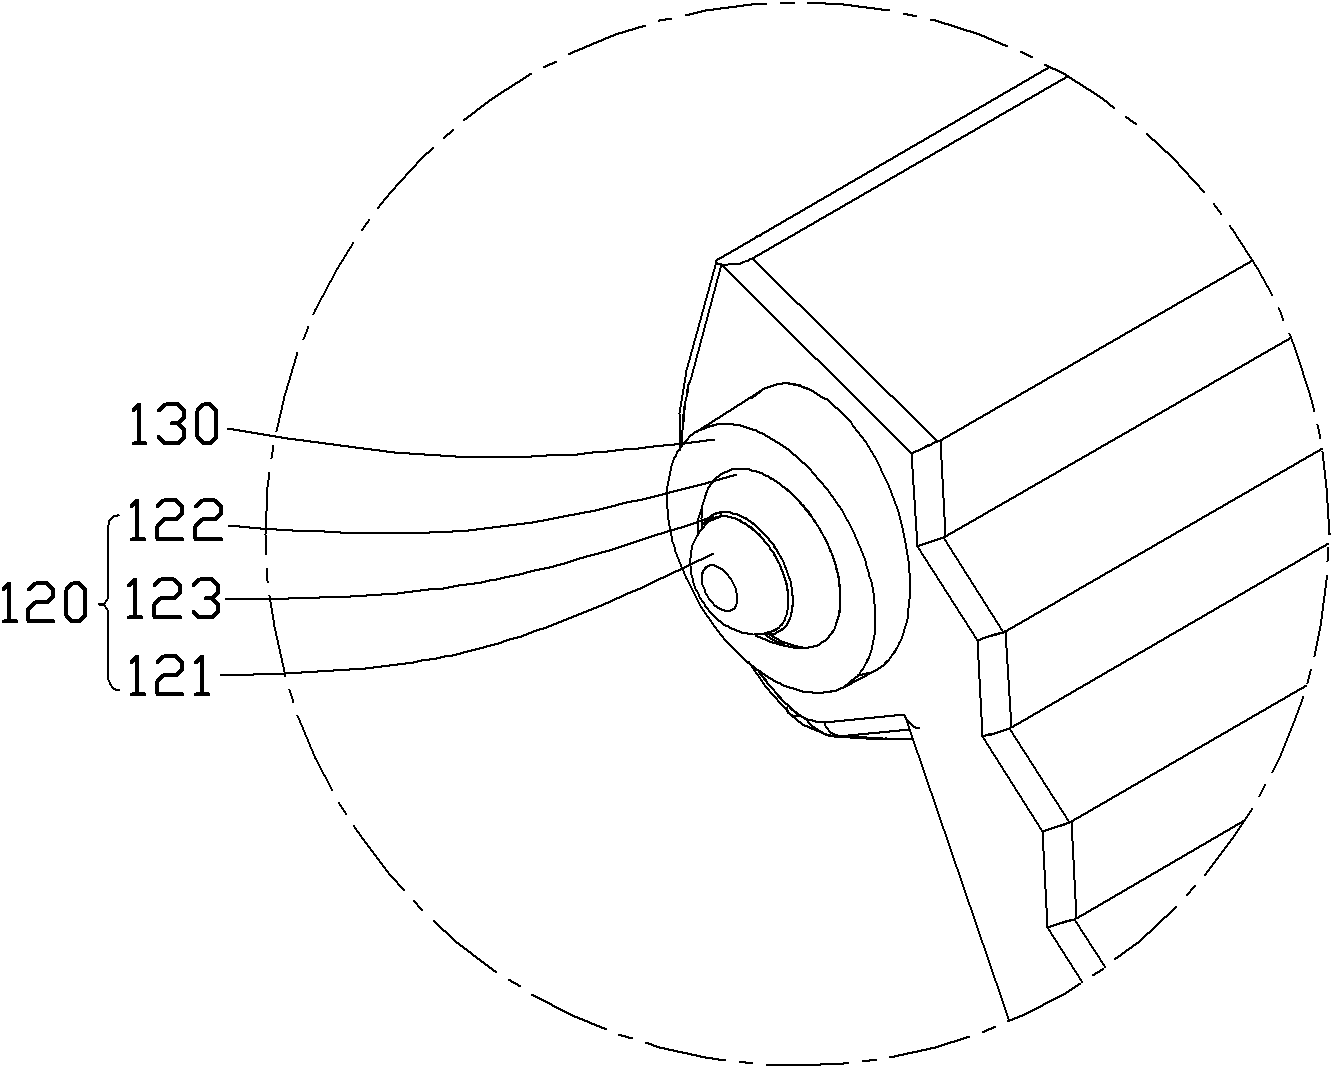 Shell product with ball head rotating shaft